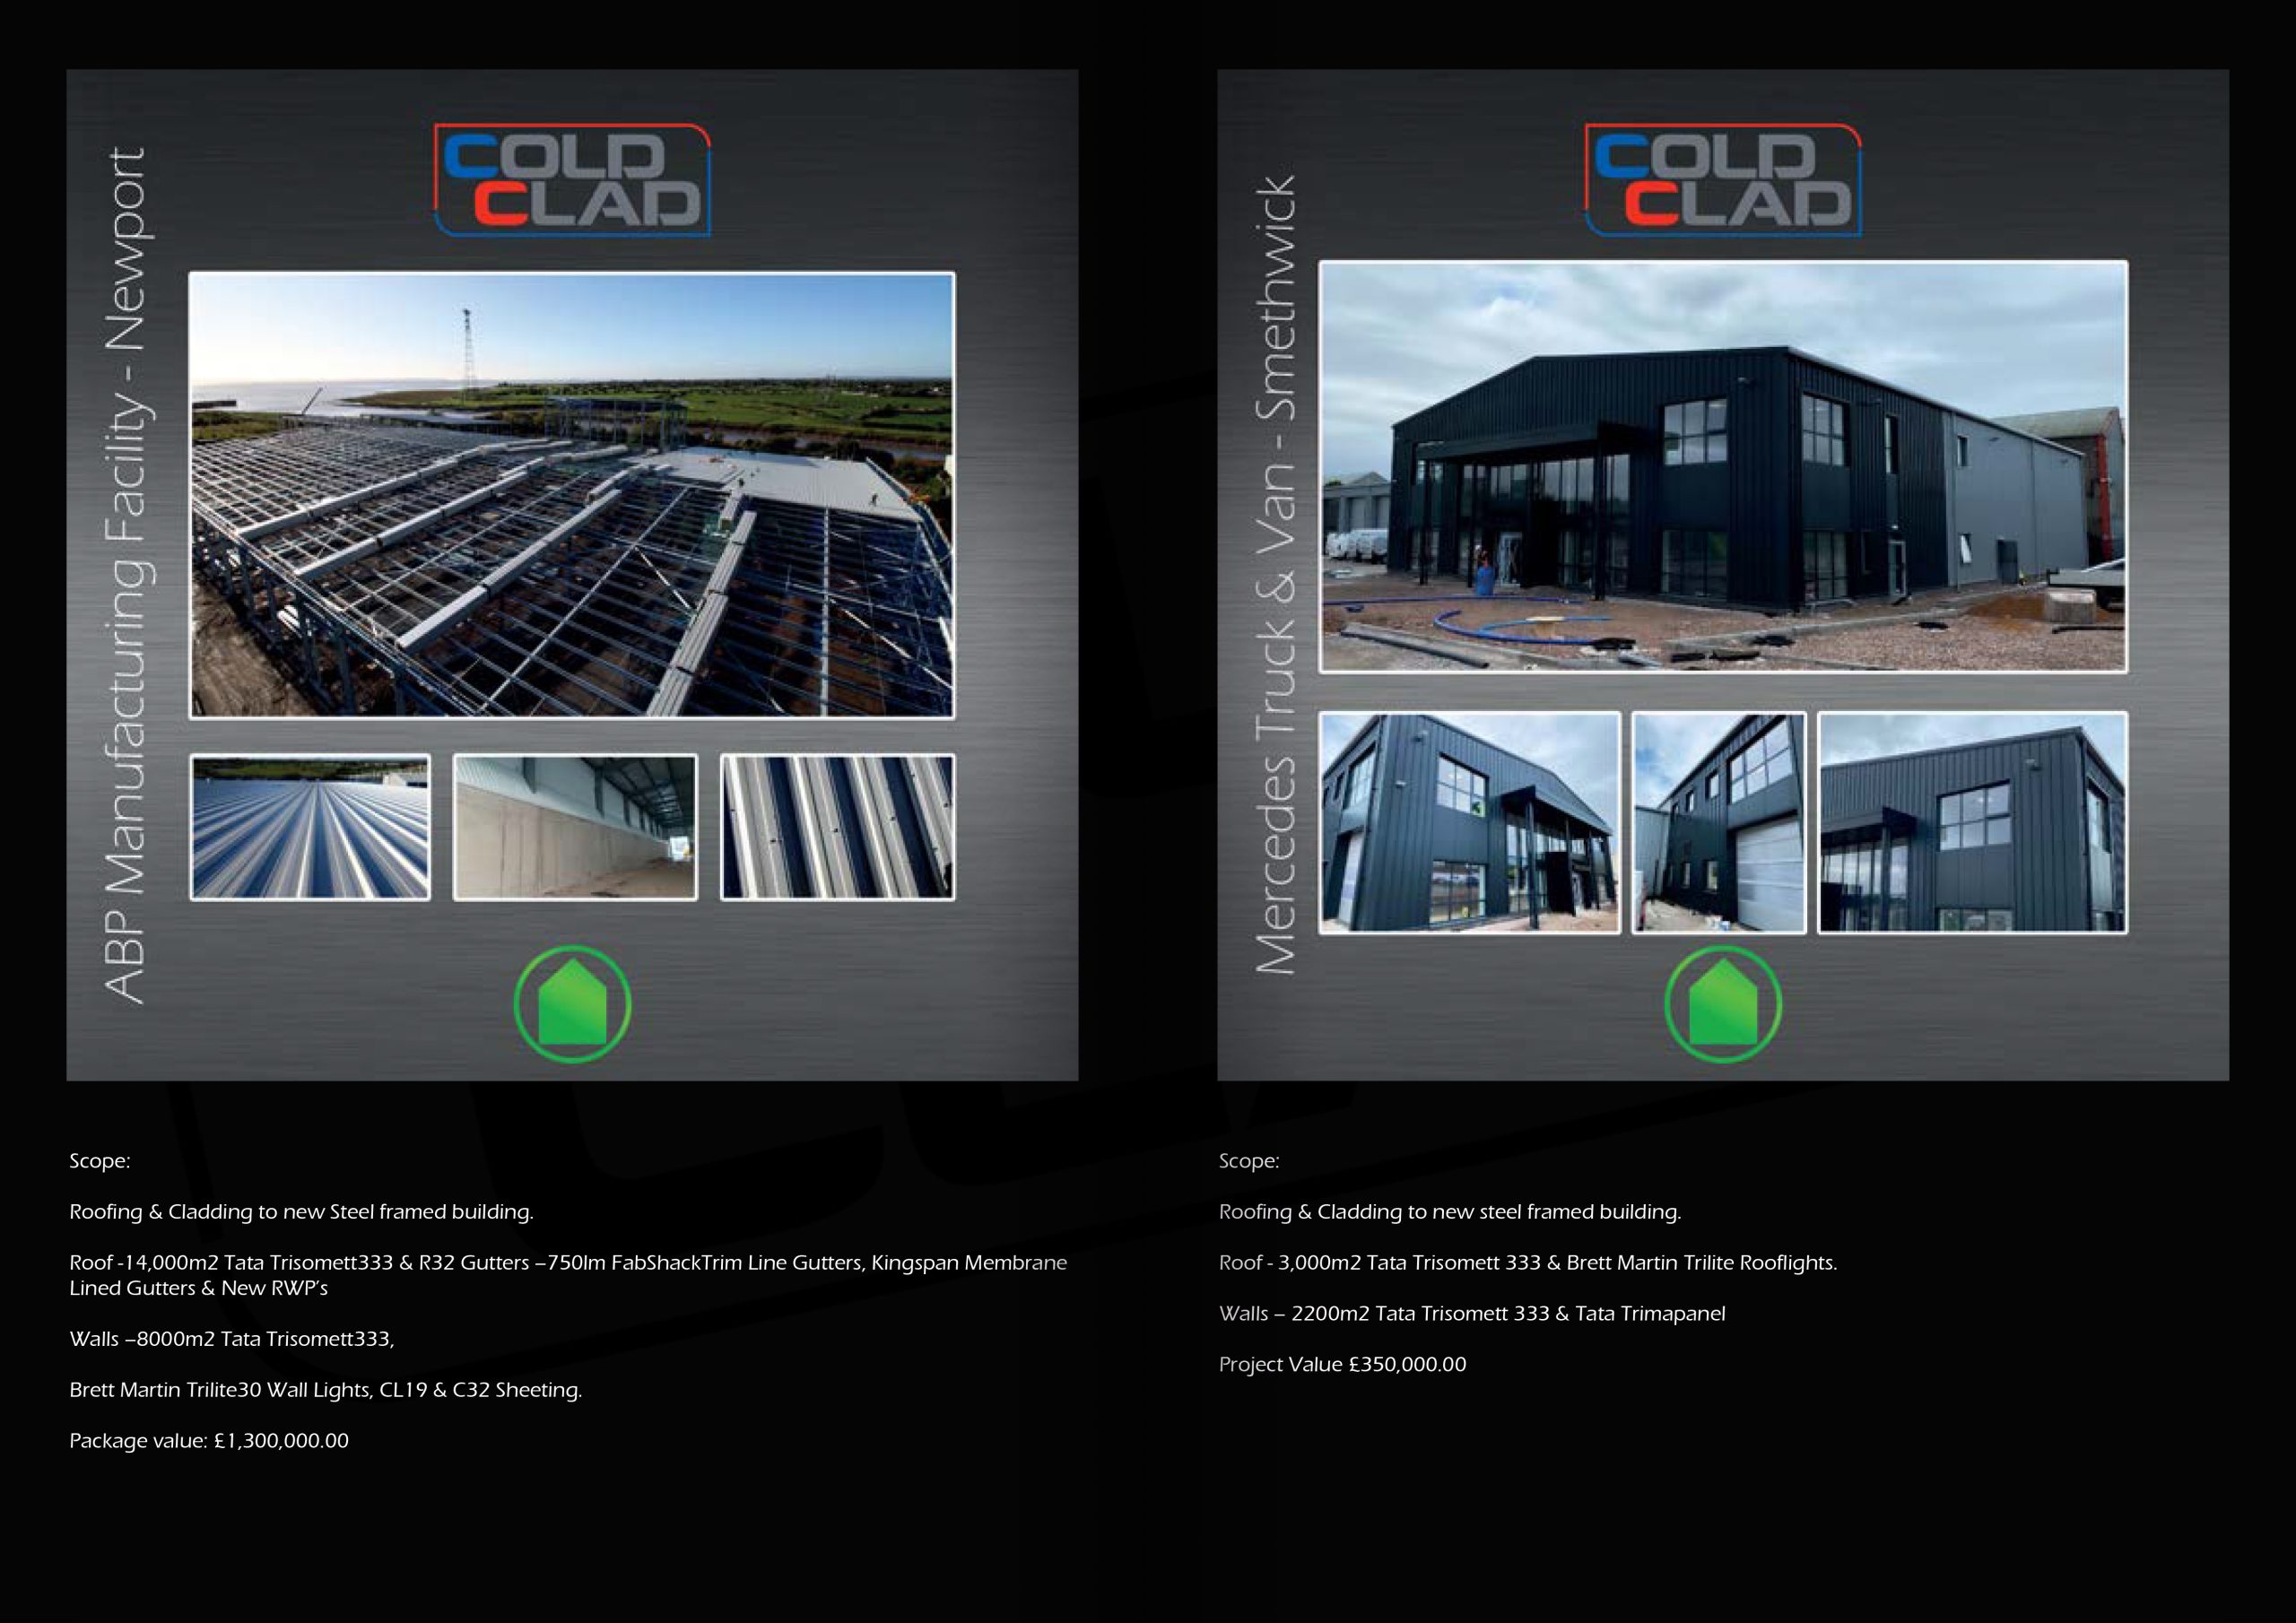 Cold Clad Roofing & Cladding Example